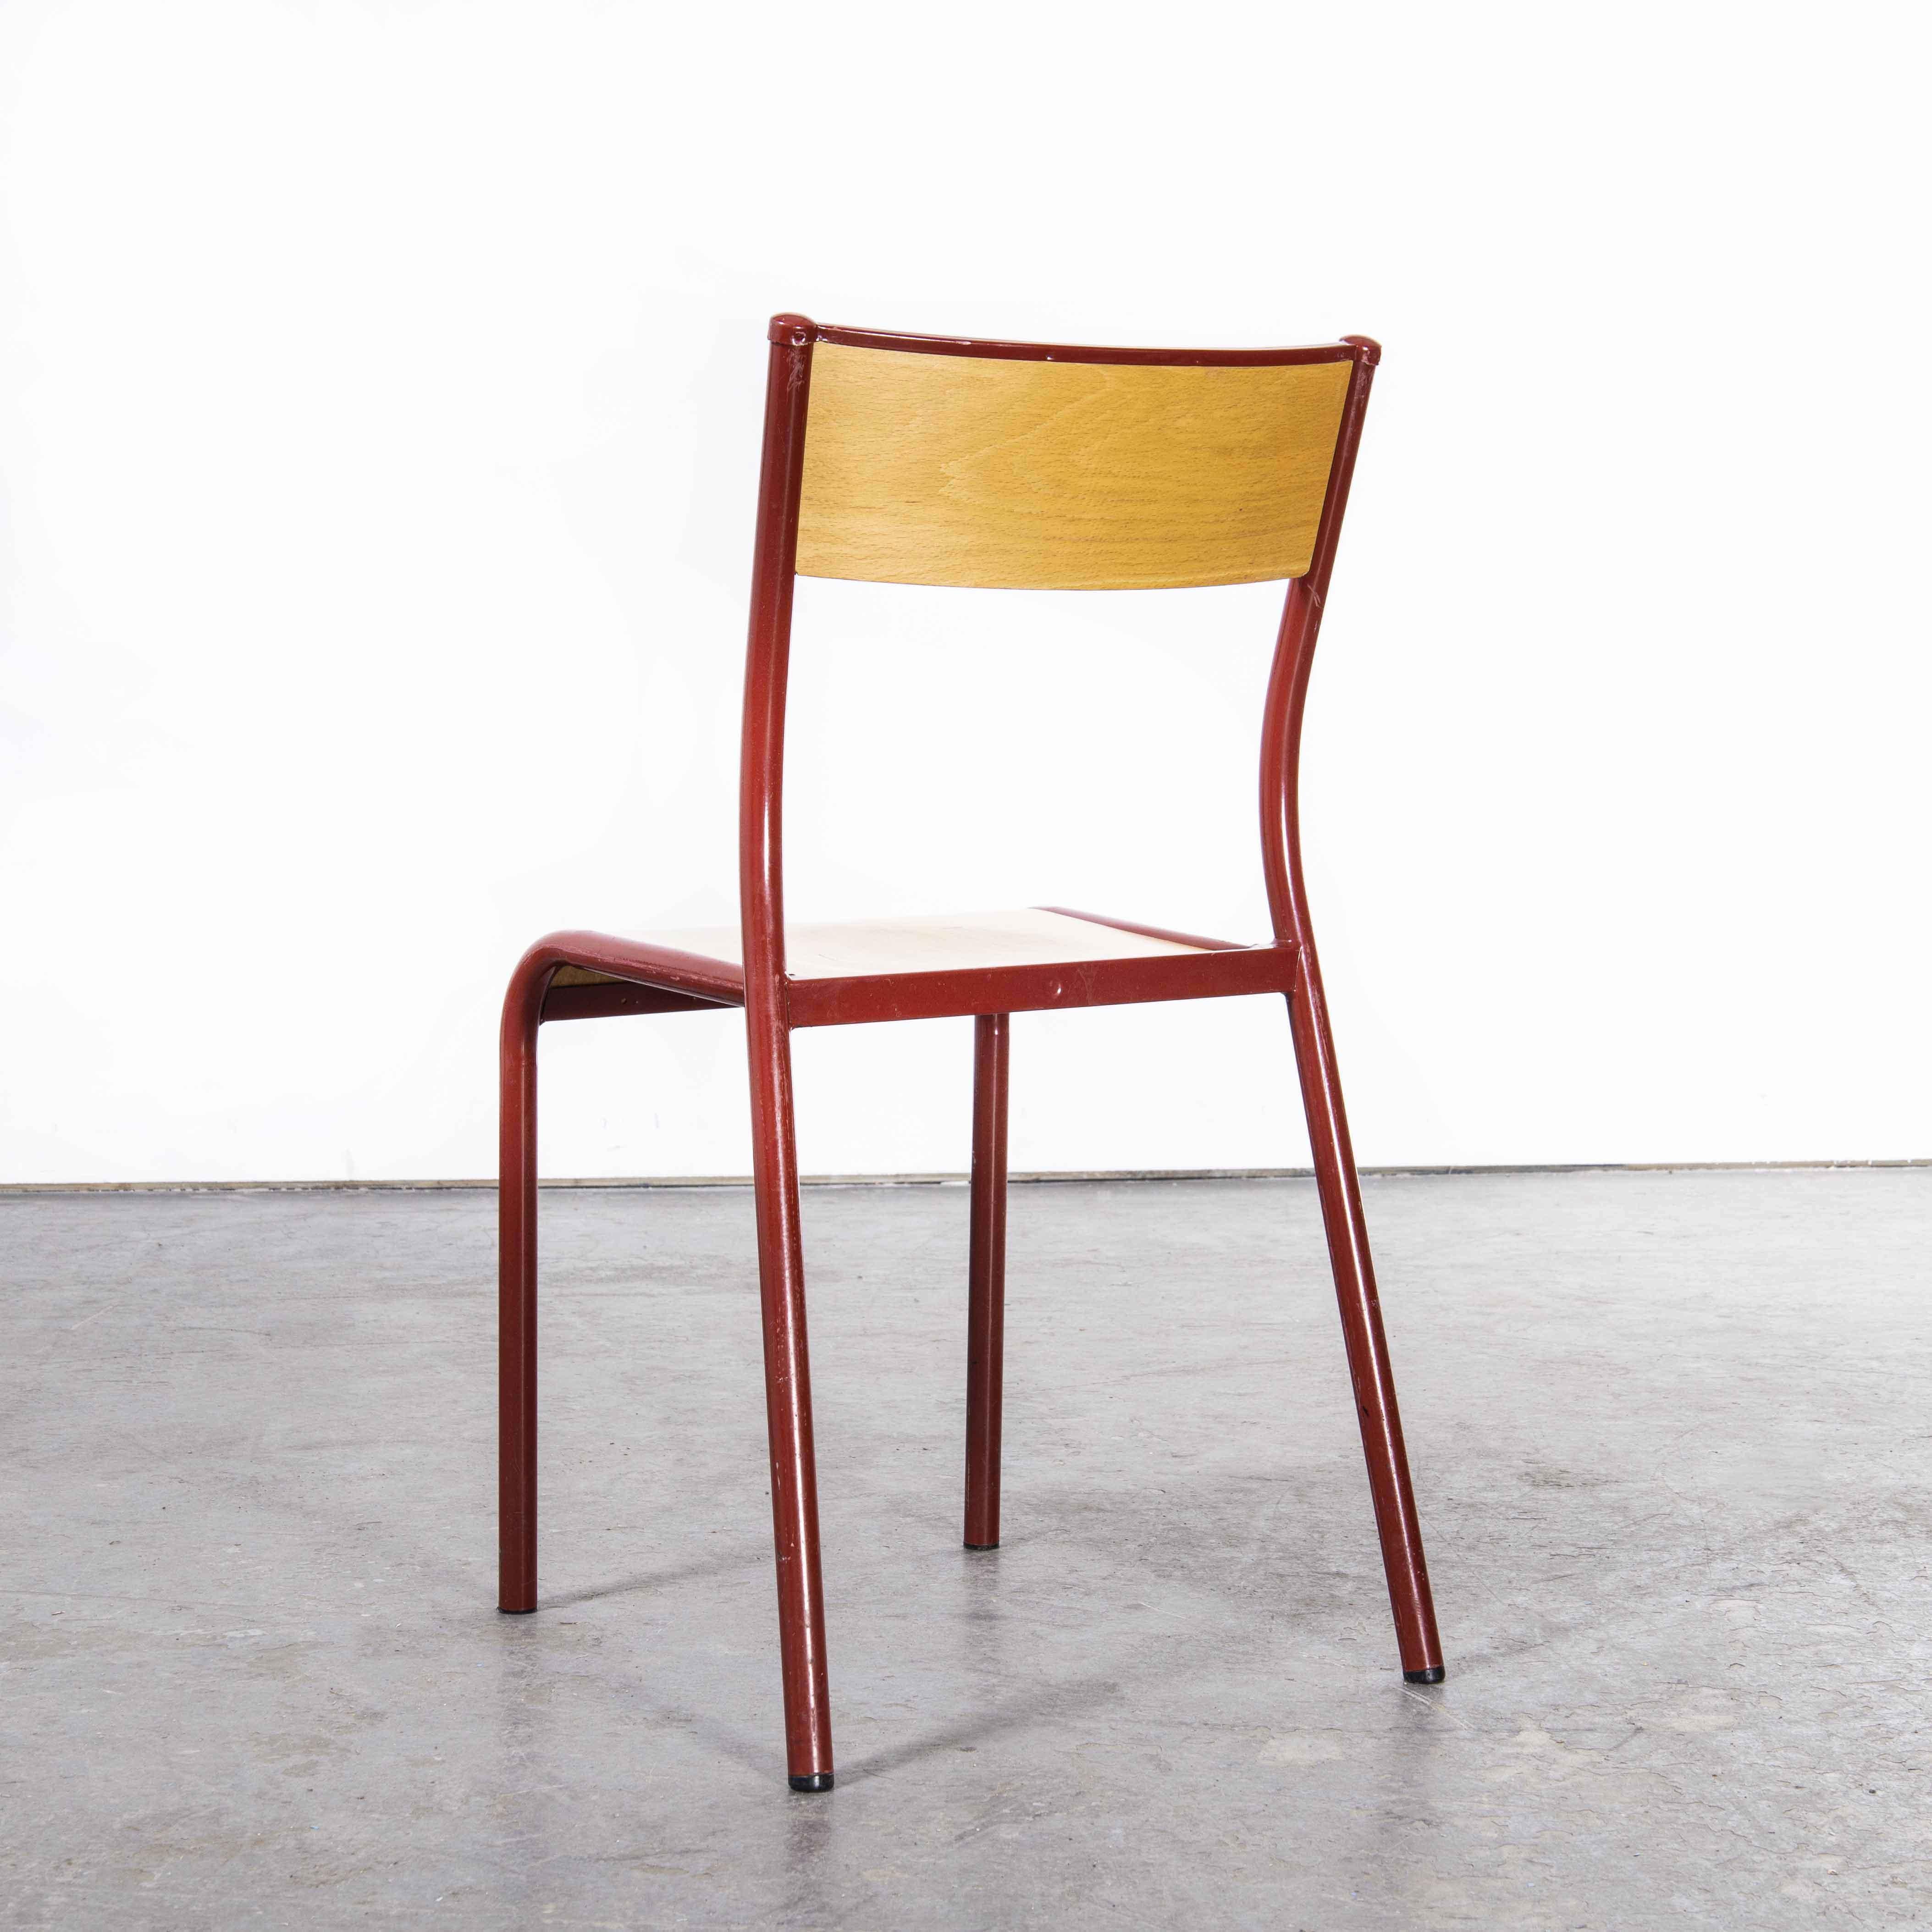 1970’s French Mullca Stacking – Dining Chairs – Red Model 510 – Set Of Six

1950’s French Mullca Stacking – Dining Chairs – Red Model 510 – Set Of Six. One of our most favourite chairs, in 1947 Robert Muller and Gaston Cavaillon created the